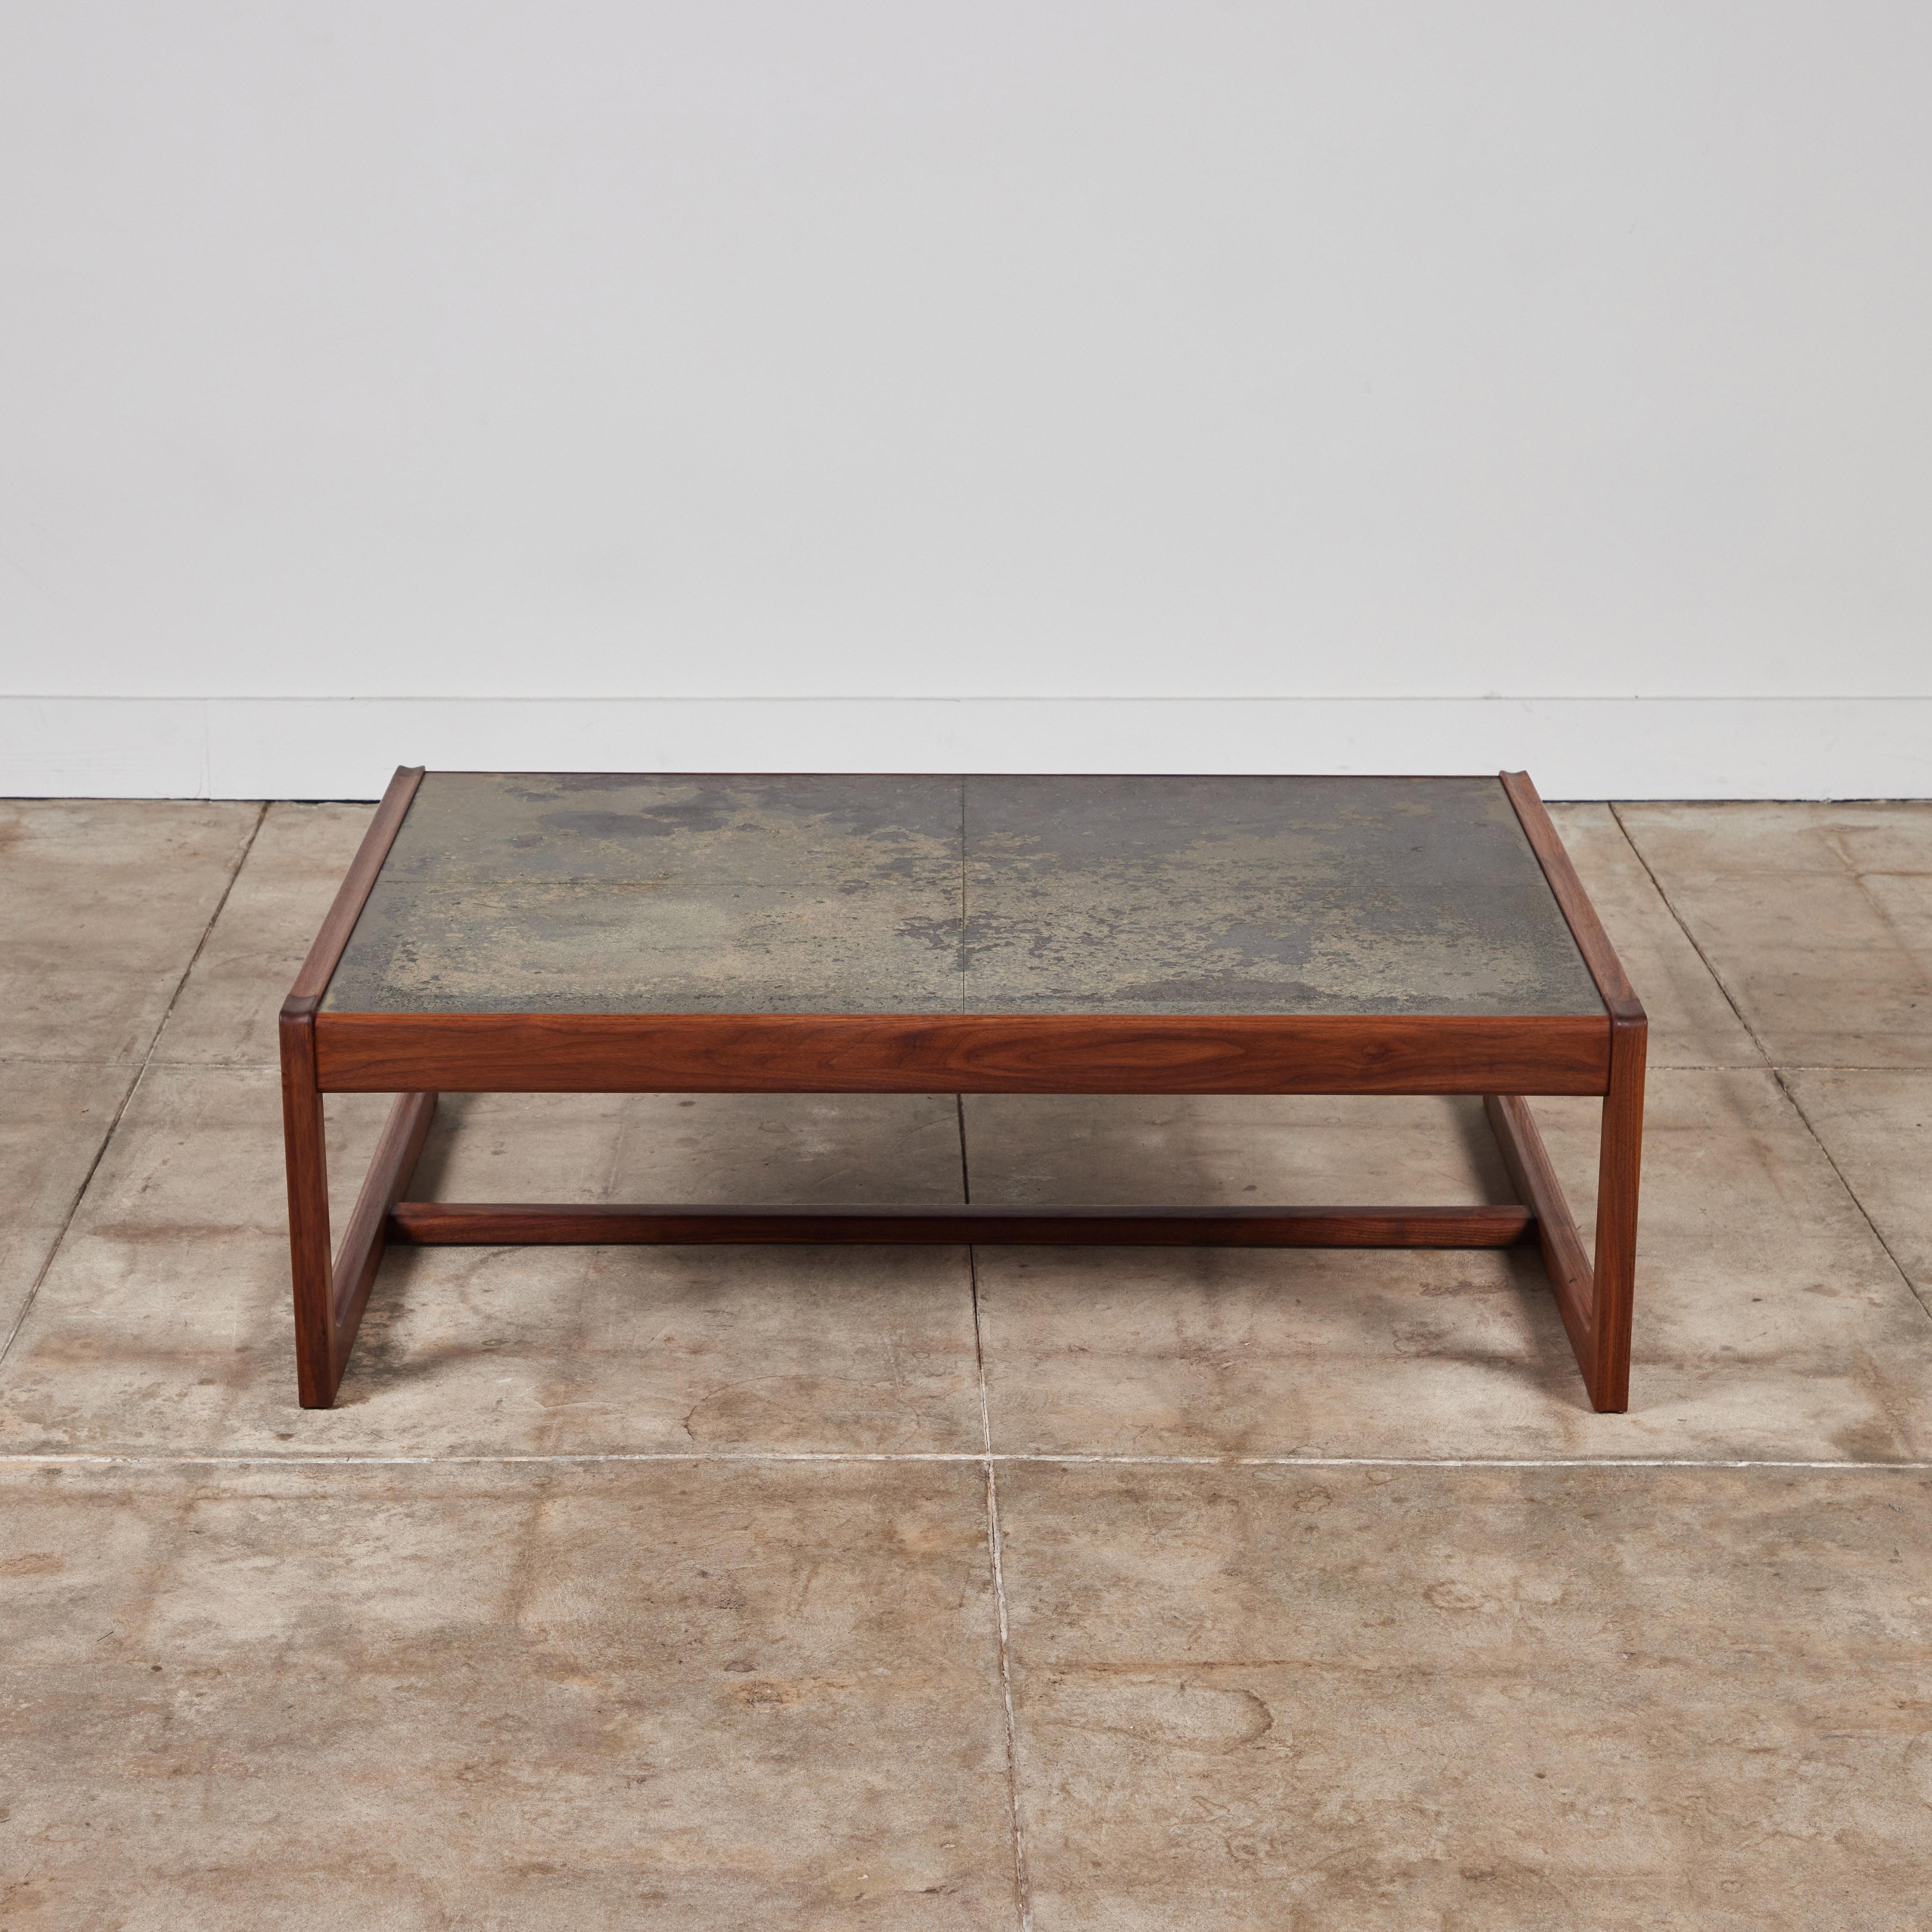 Scandinavian Modern DUX Teak Coffee Table with Patinated Bronze Table Top